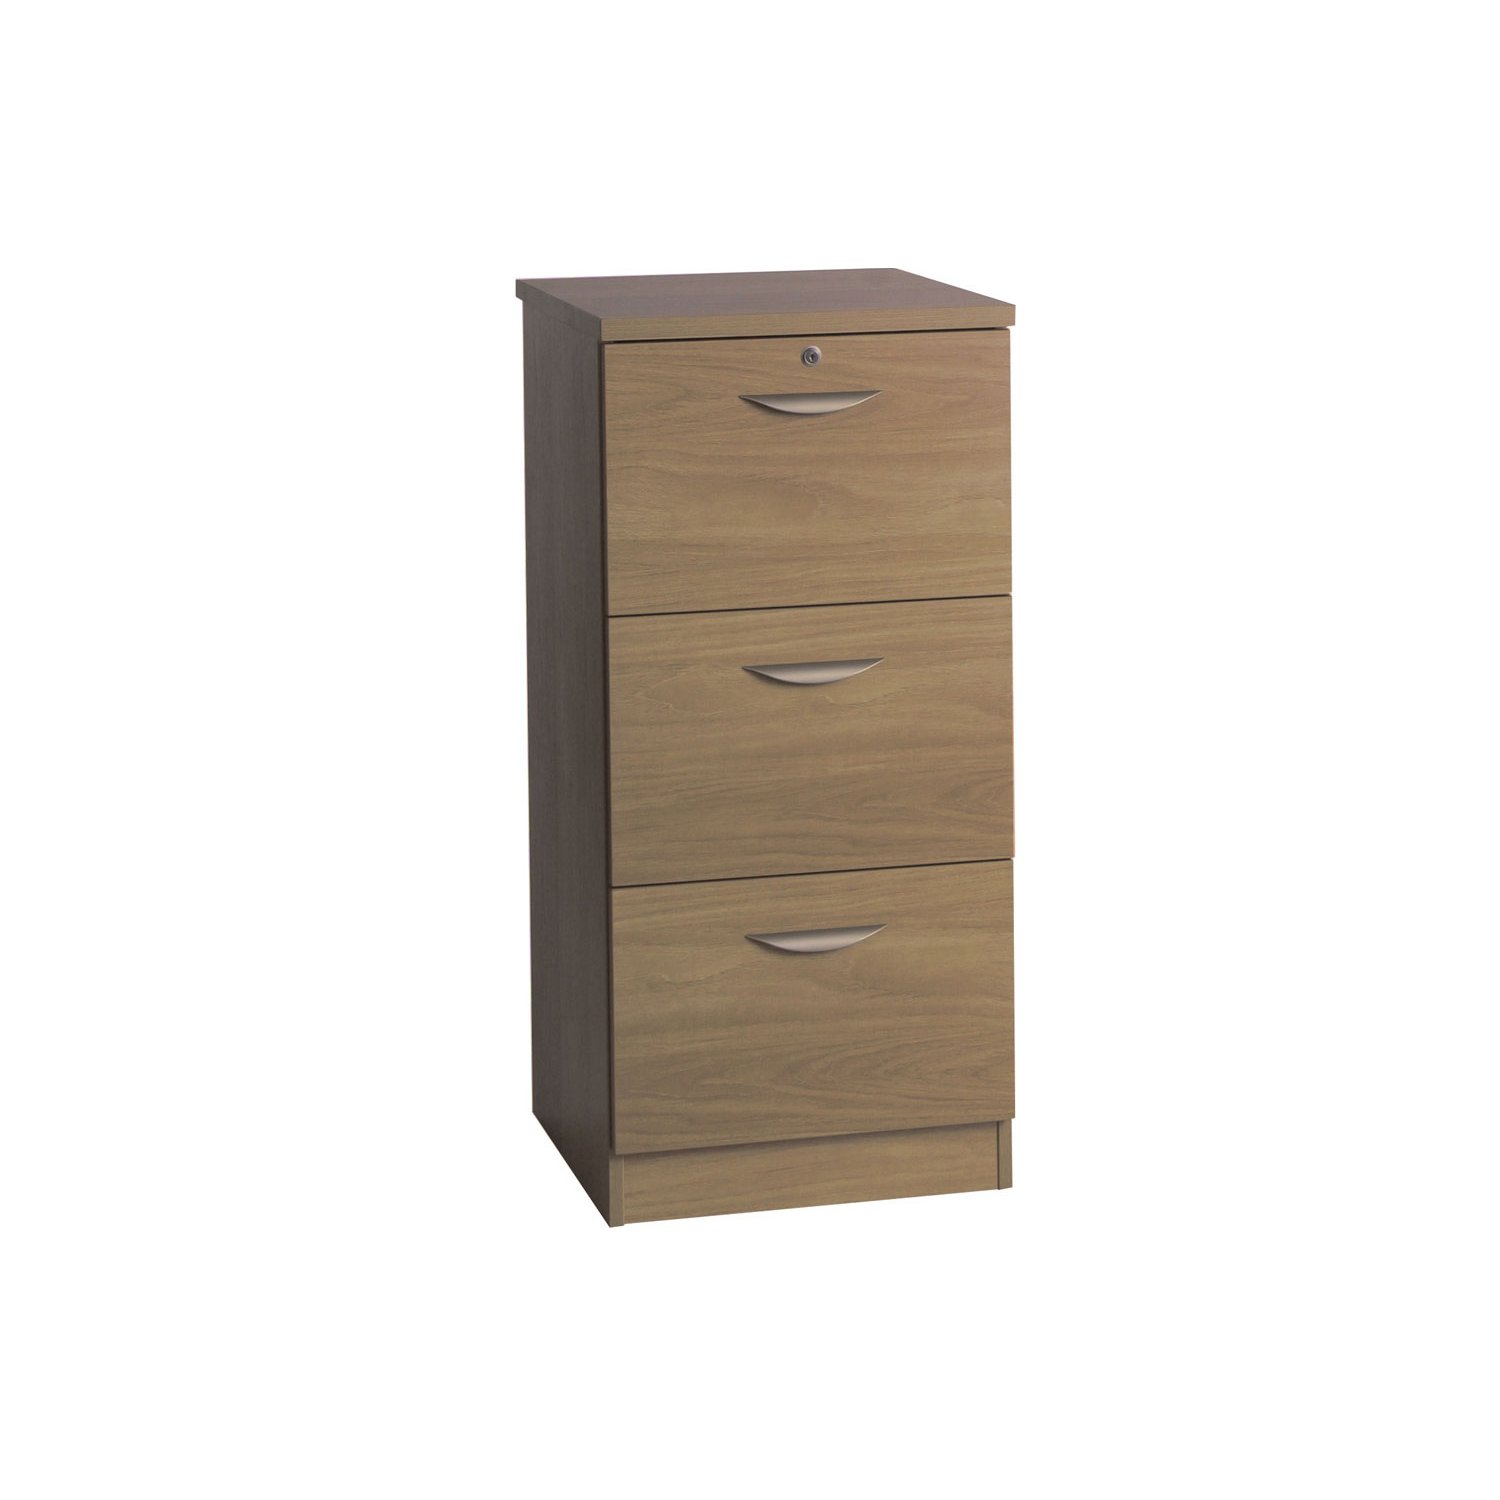 Small Office Mid Height 3 Drawer Filing Cabinet, English Oak